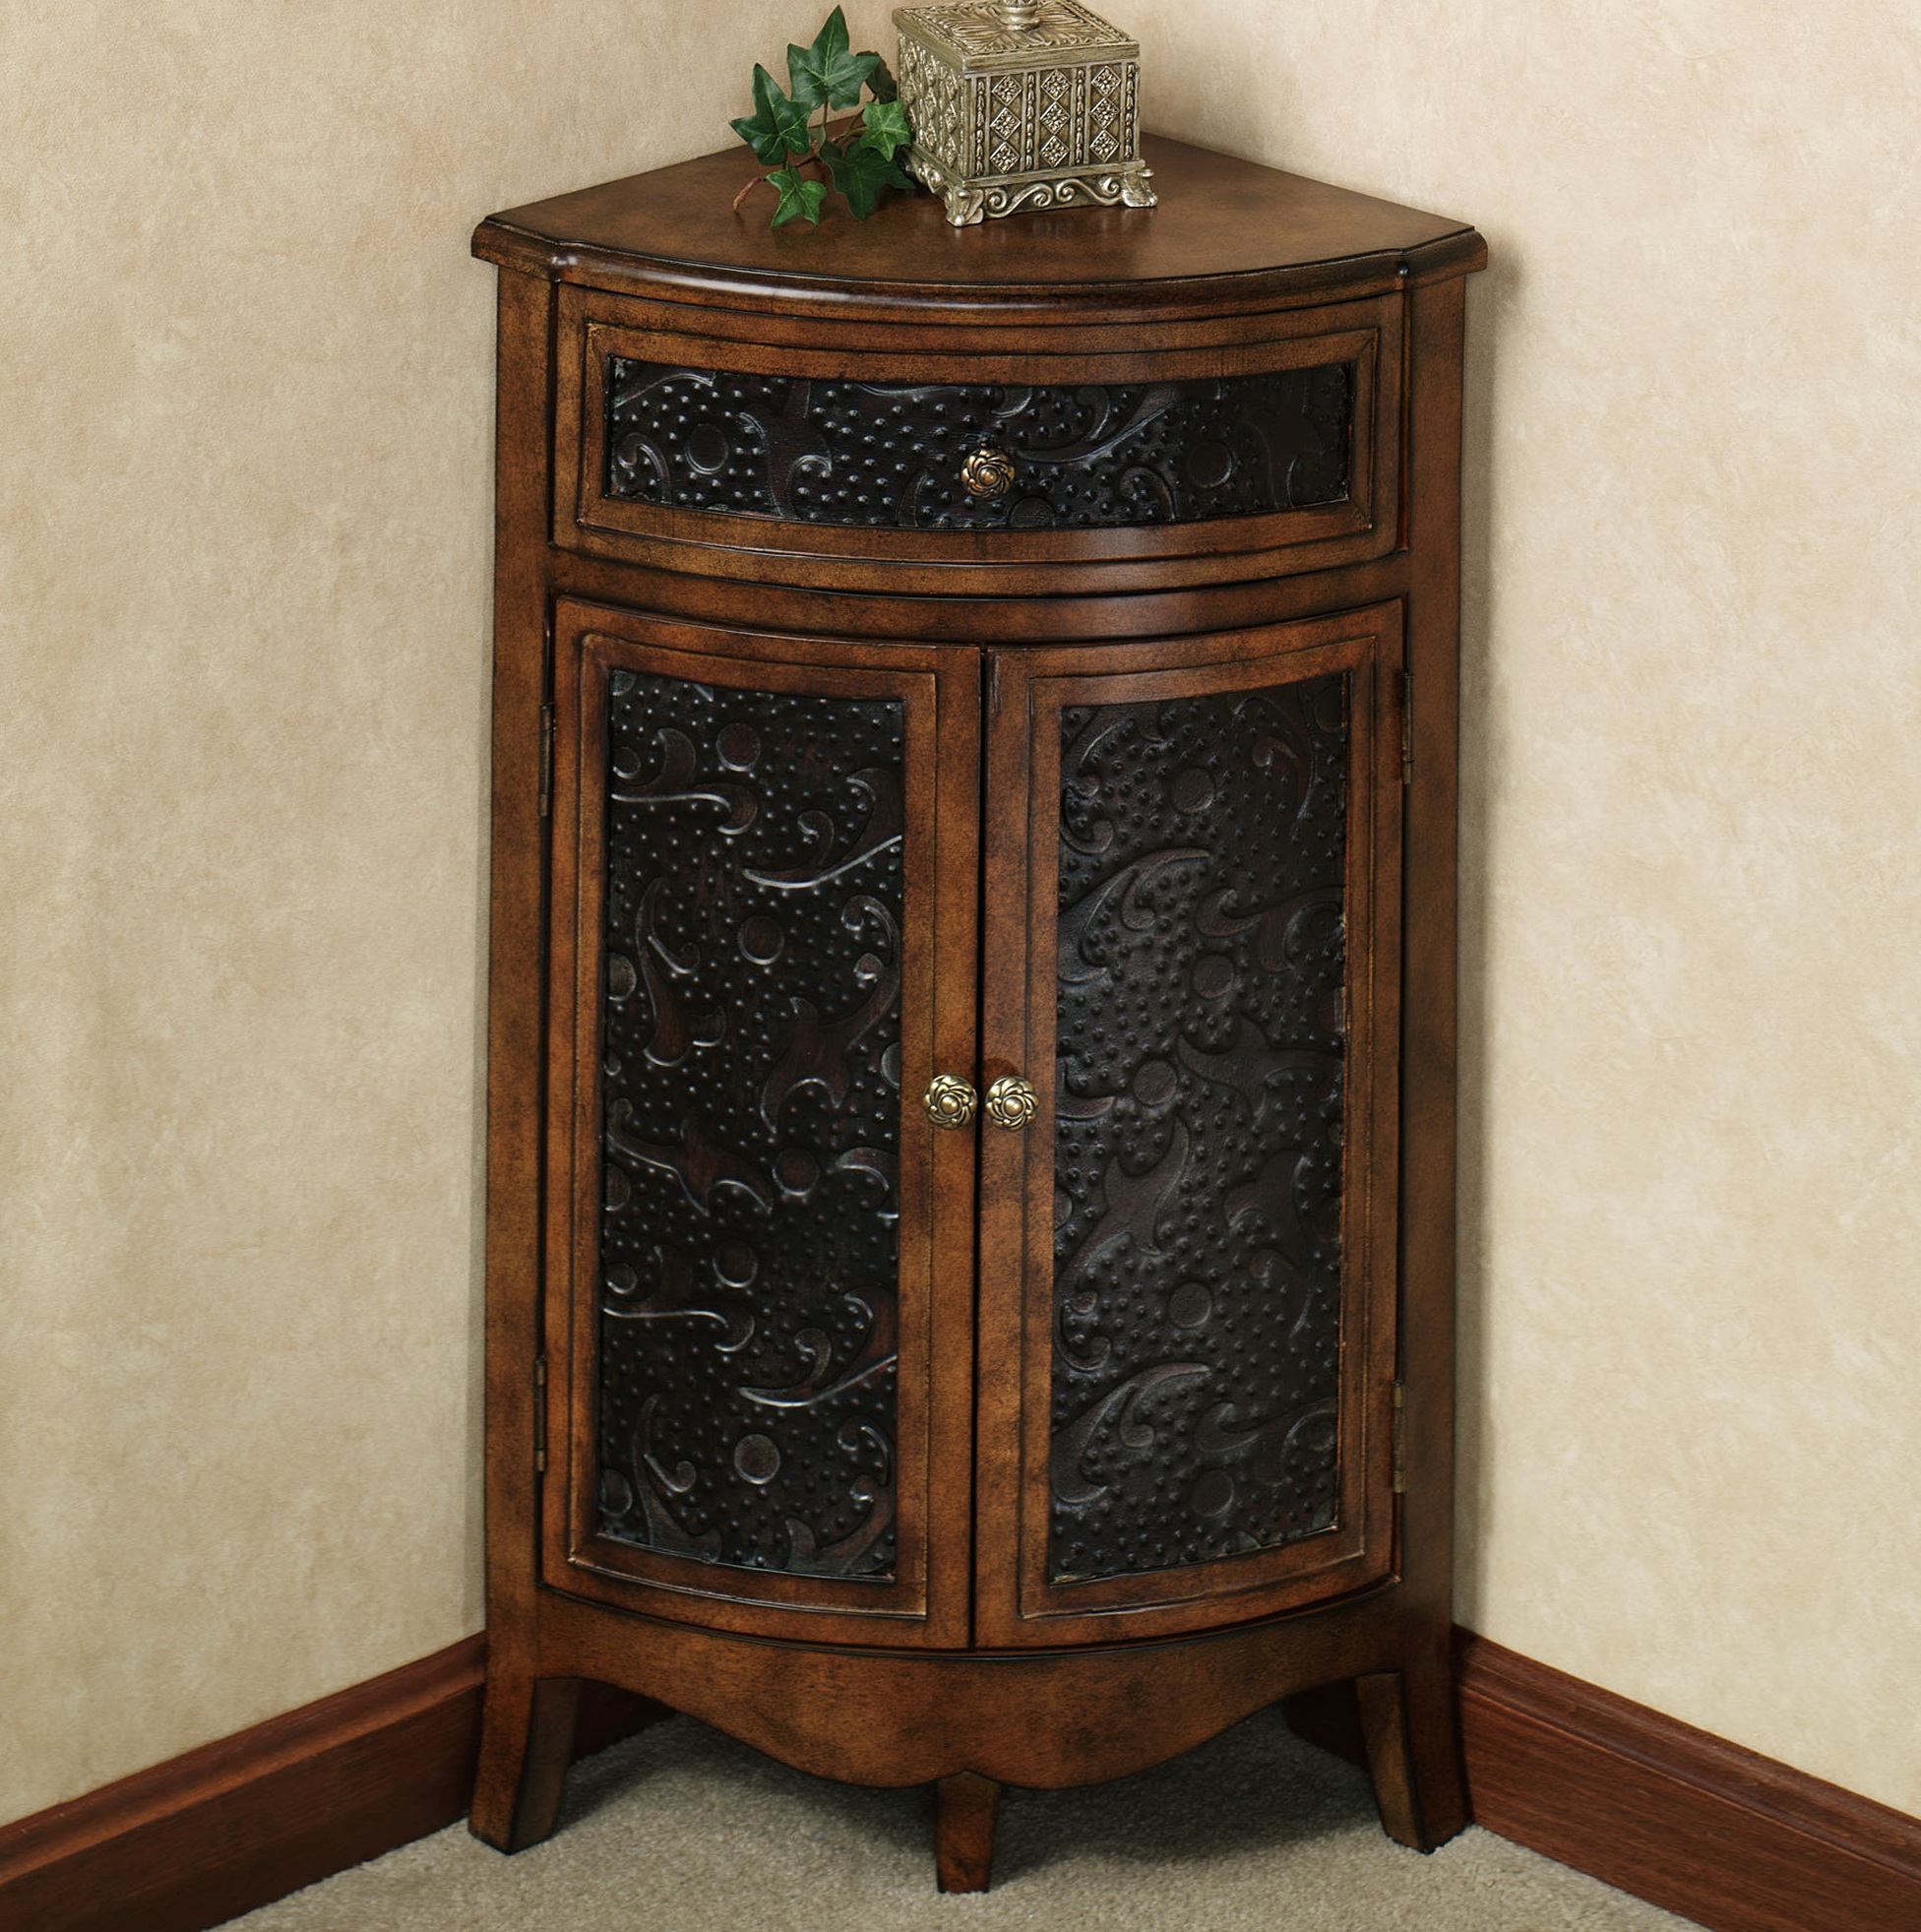 Incredible Small Corner Accent Table With For Awesome Bathroom Home